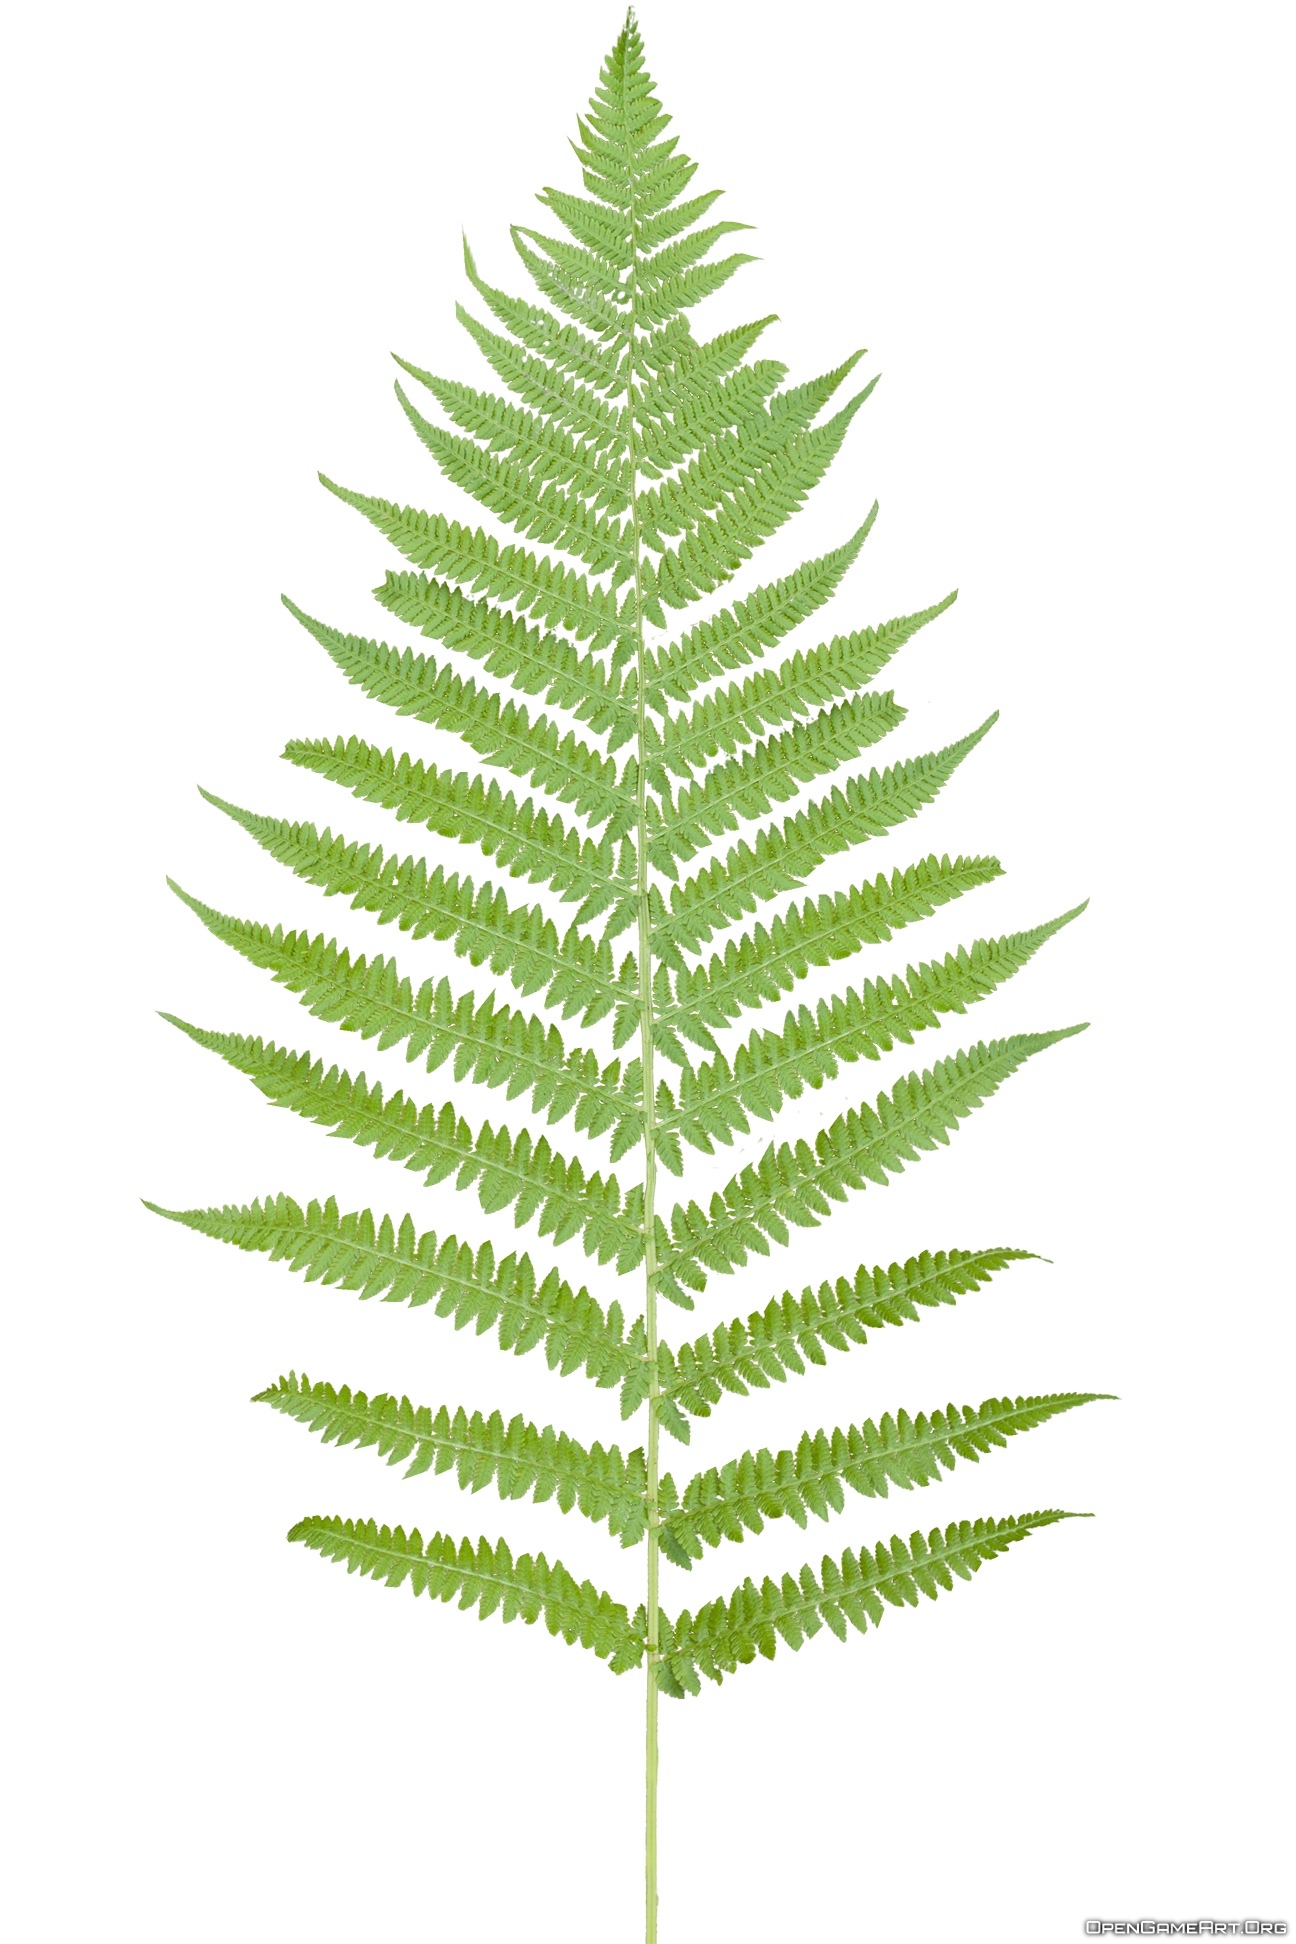 fern clipart black and white